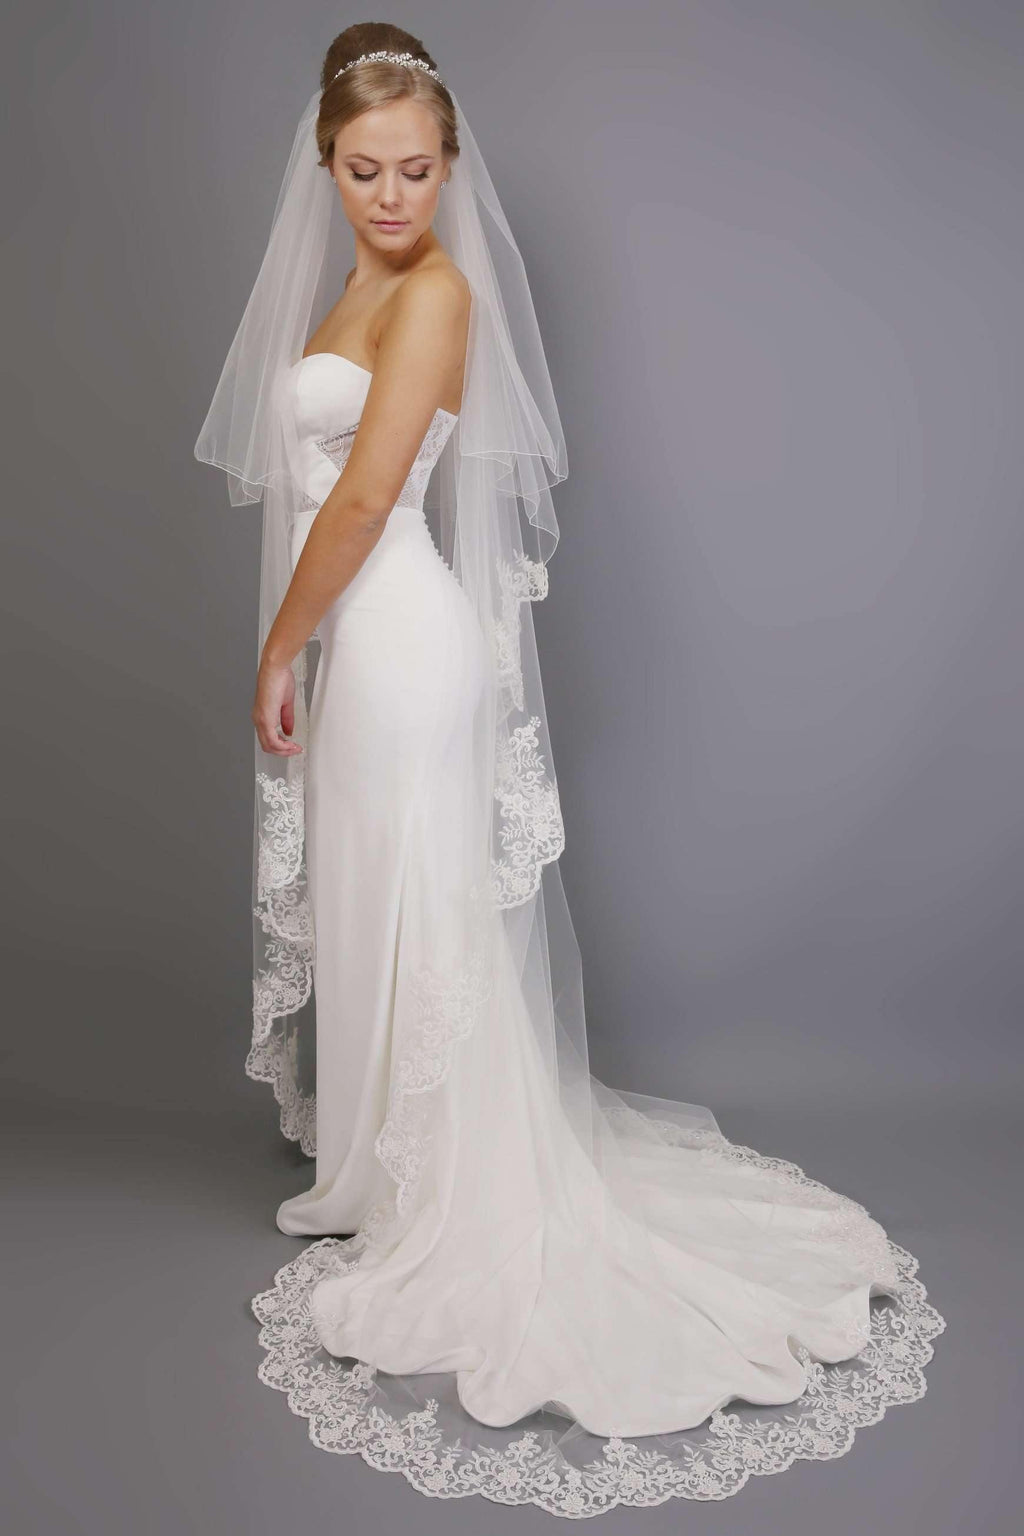 Bridal Veils for your Wedding day Adore Brides